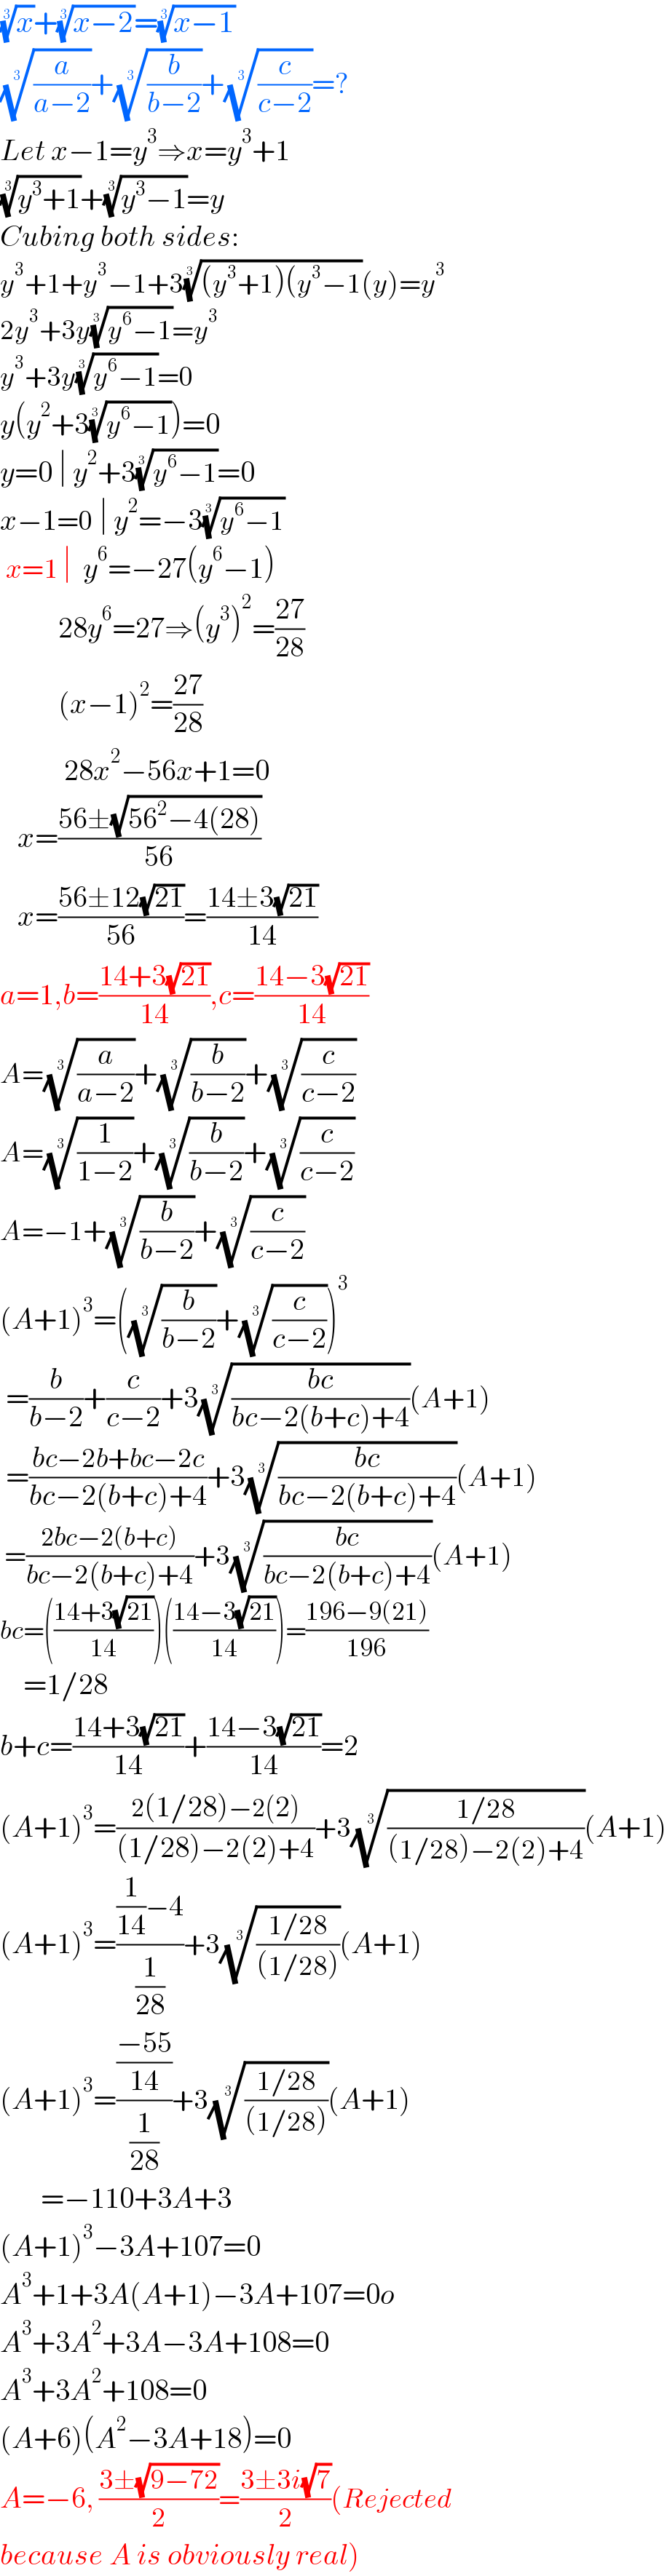 (x)^(1/3) +((x−2))^(1/3) =((x−1))^(1/3)   ((a/(a−2)))^(1/3) +((b/(b−2)))^(1/3) +((c/(c−2)))^(1/3) =?  Let x−1=y^3 ⇒x=y^3 +1  ((y^3 +1))^(1/3) +((y^3 −1))^(1/3) =y  Cubing both sides:  y^3 +1+y^3 −1+3(((y^3 +1)(y^3 −1))^(1/3) (y)=y^3   2y^3 +3y((y^6 −1))^(1/3) =y^3   y^3 +3y((y^6 −1))^(1/3) =0  y(y^2 +3((y^6 −1))^(1/3) )=0  y=0 ∣ y^2 +3((y^6 −1))^(1/3) =0  x−1=0 ∣ y^2 =−3((y^6 −1))^(1/3)    x=1 ∣  y^6 =−27(y^6 −1)            28y^6 =27⇒(y^3 )^2 =((27)/(28))            (x−1)^2 =((27)/(28))             28x^2 −56x+1=0     x=((56±(√(56^2 −4(28))))/(56))     x=((56±12(√(21)))/(56))=((14±3(√(21)))/(14))  a=1,b=((14+3(√(21)))/(14)),c=((14−3(√(21)))/(14))  A=((a/(a−2)))^(1/3) +((b/(b−2)))^(1/3) +((c/(c−2)))^(1/3)   A=((1/(1−2)))^(1/3) +((b/(b−2)))^(1/3) +((c/(c−2)))^(1/3)   A=−1+((b/(b−2)))^(1/3) +((c/(c−2)))^(1/3)   (A+1)^3 =(((b/(b−2)))^(1/3) +((c/(c−2)))^(1/3) )^3    =(b/(b−2))+(c/(c−2))+3(((bc)/(bc−2(b+c)+4)))^(1/3) (A+1)   =((bc−2b+bc−2c)/(bc−2(b+c)+4))+3(((bc)/(bc−2(b+c)+4)))^(1/3) (A+1)   =((2bc−2(b+c))/(bc−2(b+c)+4))+3(((bc)/(bc−2(b+c)+4)))^(1/3) (A+1)  bc=(((14+3(√(21)))/(14)))(((14−3(√(21)))/(14)))=((196−9(21))/(196))      =1/28  b+c=((14+3(√(21)))/(14))+((14−3(√(21)))/(14))=2  (A+1)^3 =((2(1/28)−2(2))/((1/28)−2(2)+4))+3(((1/28)/((1/28)−2(2)+4)))^(1/3) (A+1)  (A+1)^3 =(((1/(14))−4)/(1/(28)))+3(((1/28)/((1/28))))^(1/3) (A+1)  (A+1)^3 =(((−55)/(14))/(1/(28)))+3(((1/28)/((1/28))))^(1/3) (A+1)         =−110+3A+3  (A+1)^3 −3A+107=0  A^3 +1+3A(A+1)−3A+107=0o  A^3 +3A^2 +3A−3A+108=0  A^3 +3A^2 +108=0  (A+6)(A^2 −3A+18)=0  A=−6, ((3±(√(9−72)))/2)=((3±3i(√7))/2)(Rejected  because A is obviously real)  